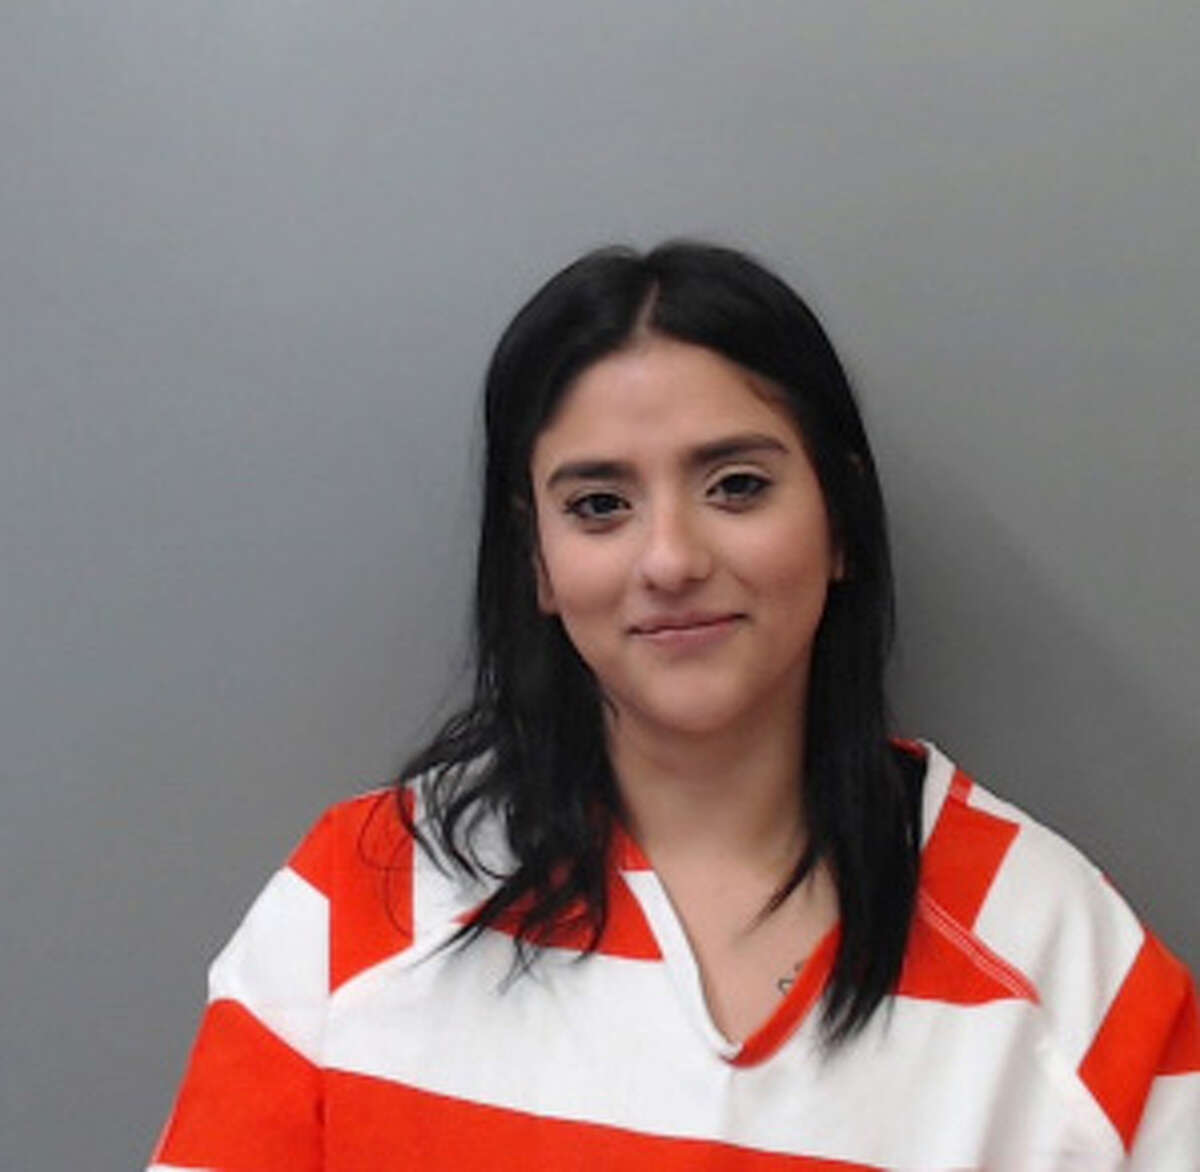 Kailah Renee Moreno, 25, was charged with assault.